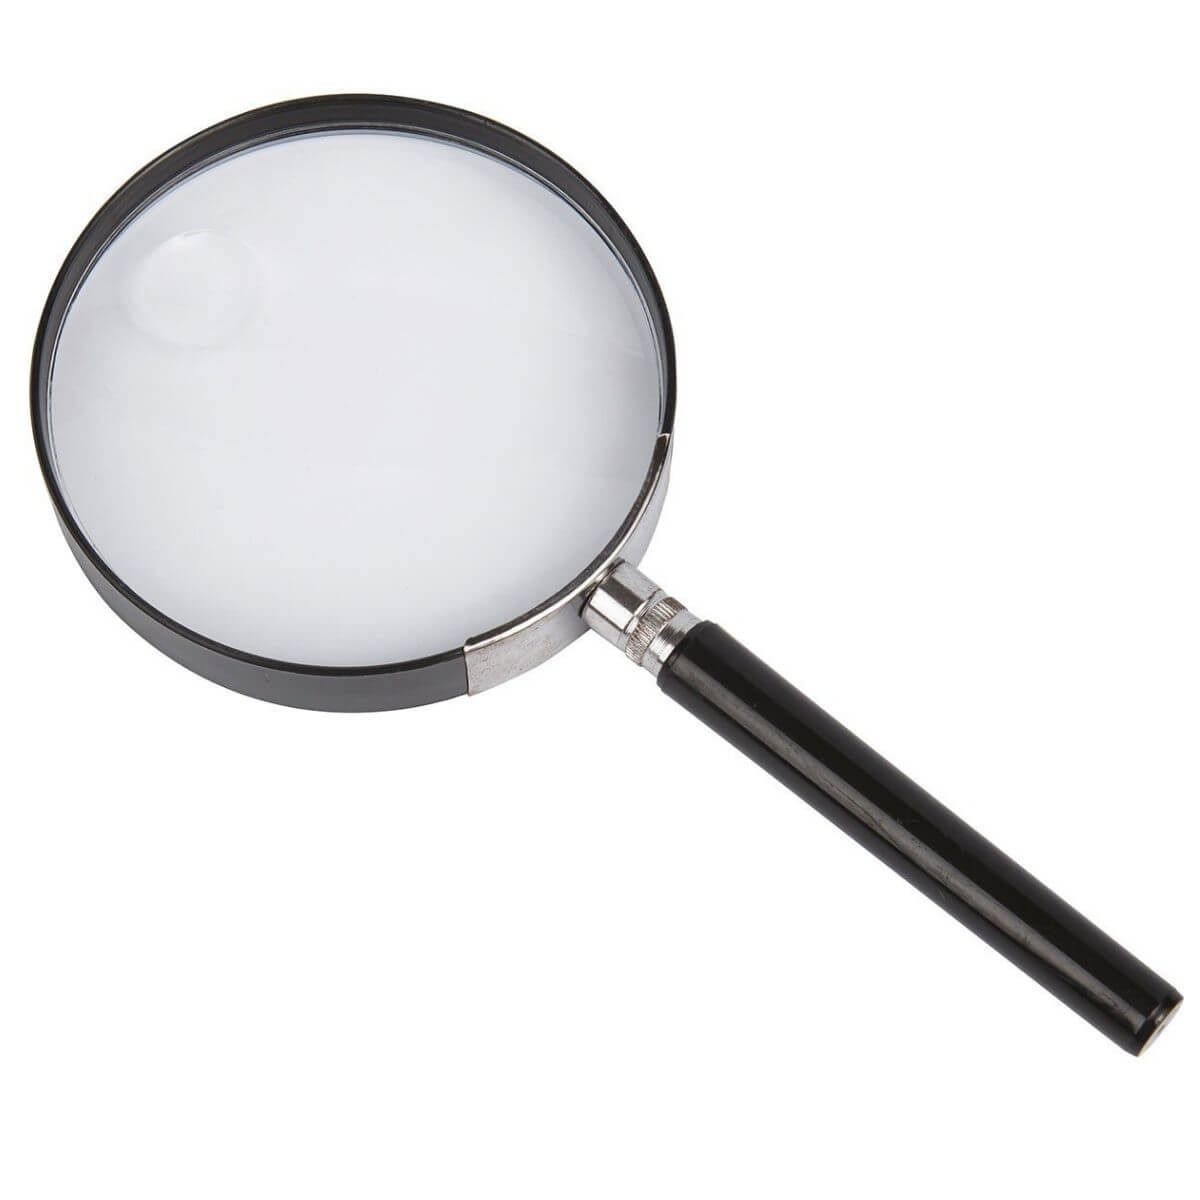 moulin-roty-garden-magnifying-glass